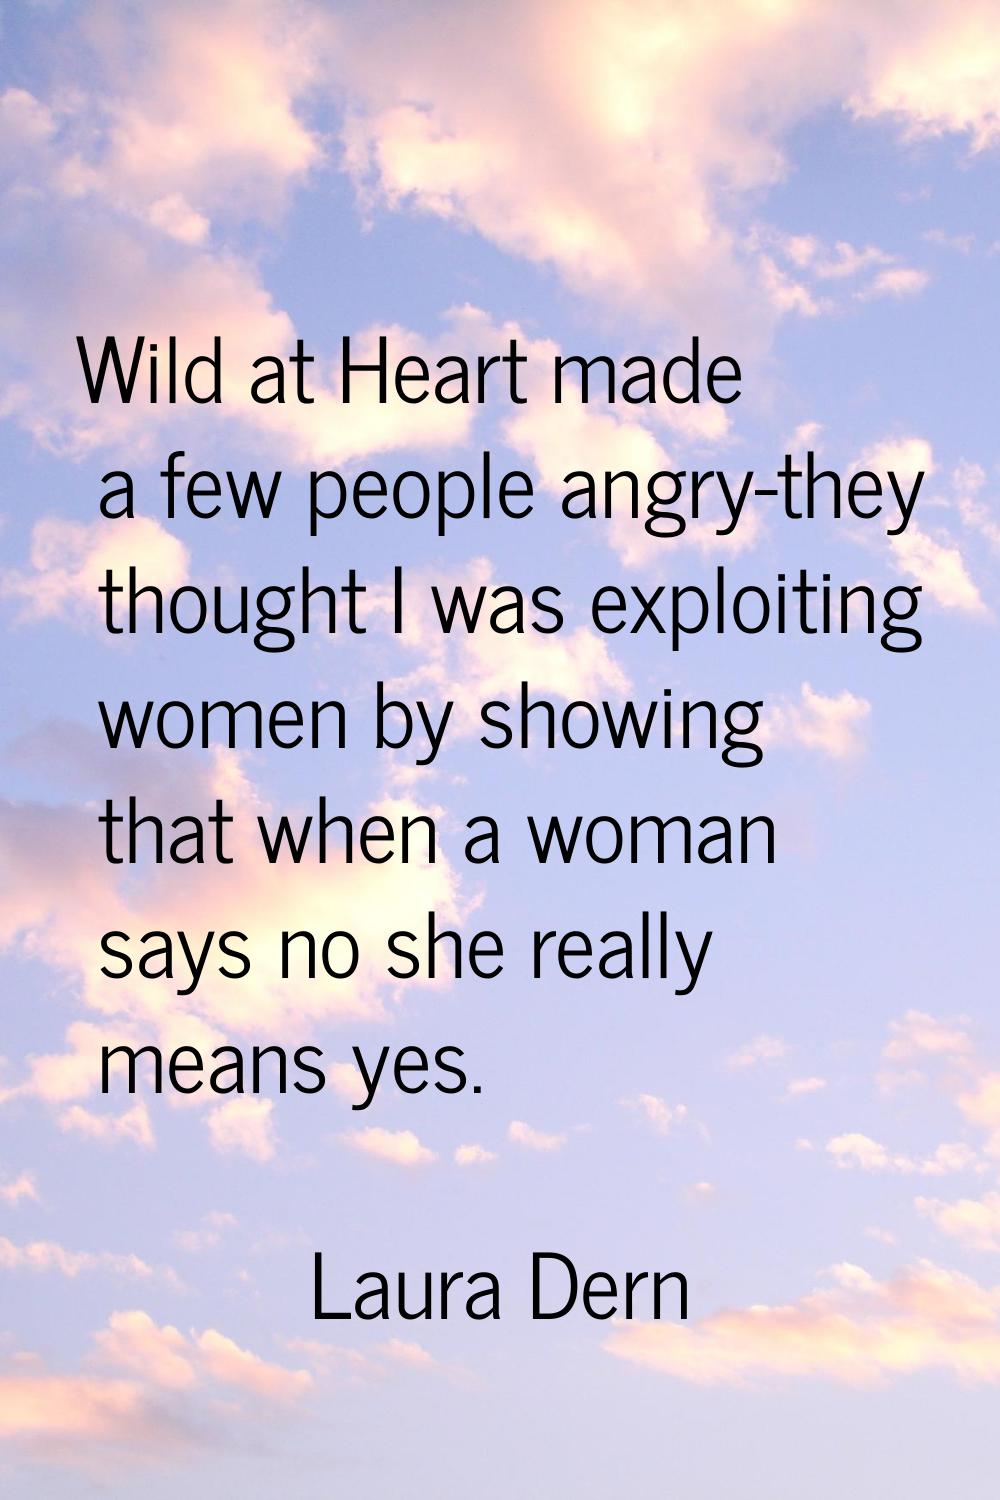 Wild at Heart made a few people angry-they thought I was exploiting women by showing that when a wo